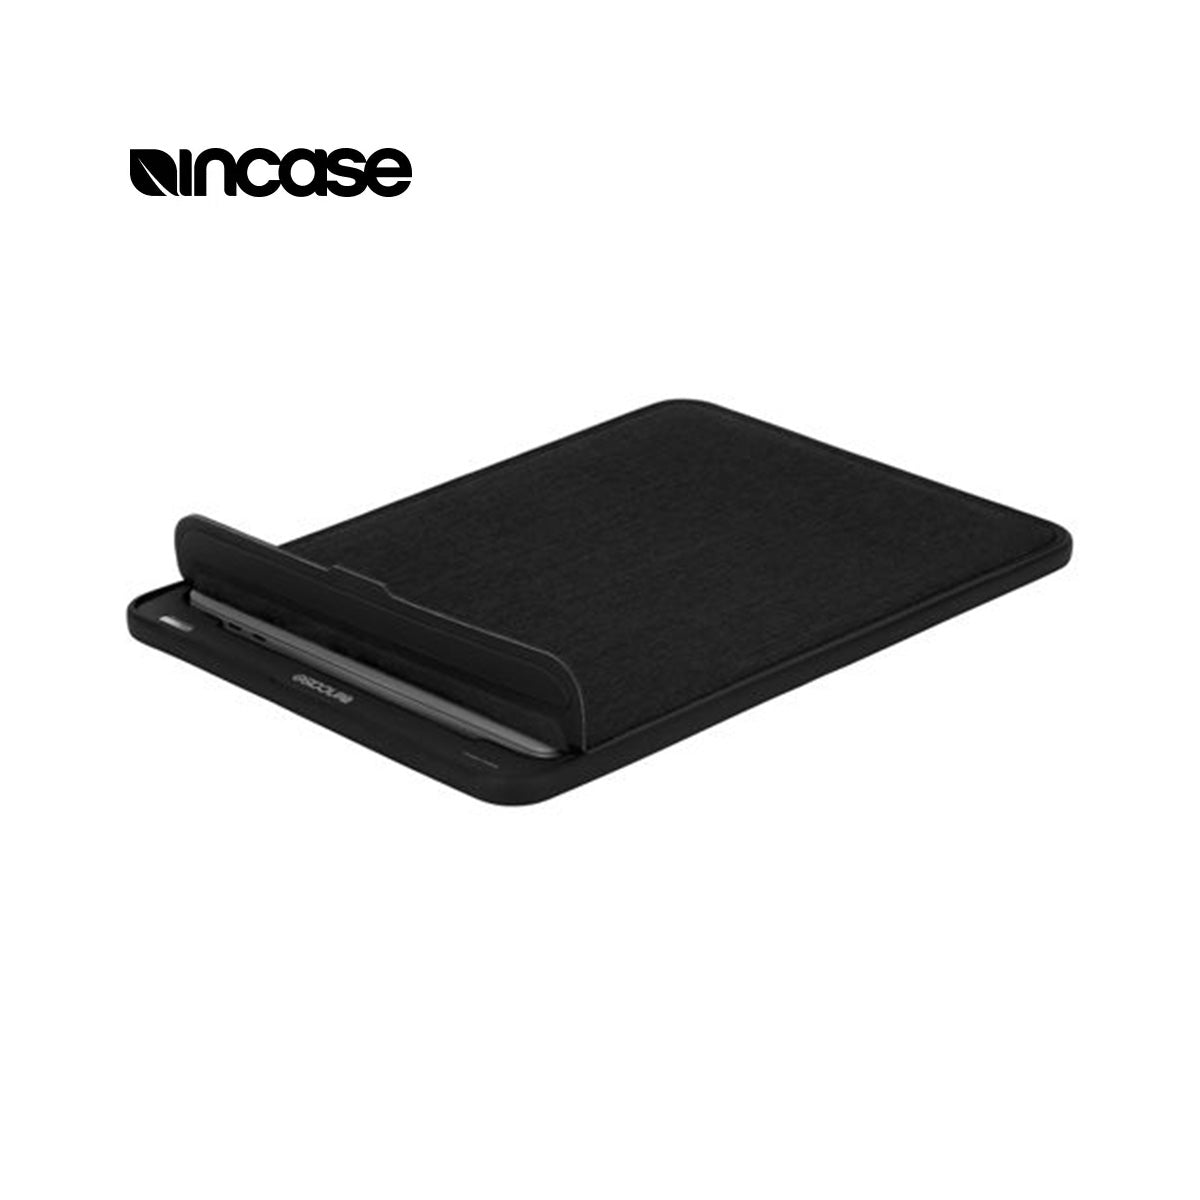 Incase ICON Sleeve for MacBook for MacBook Pro/Air 13″